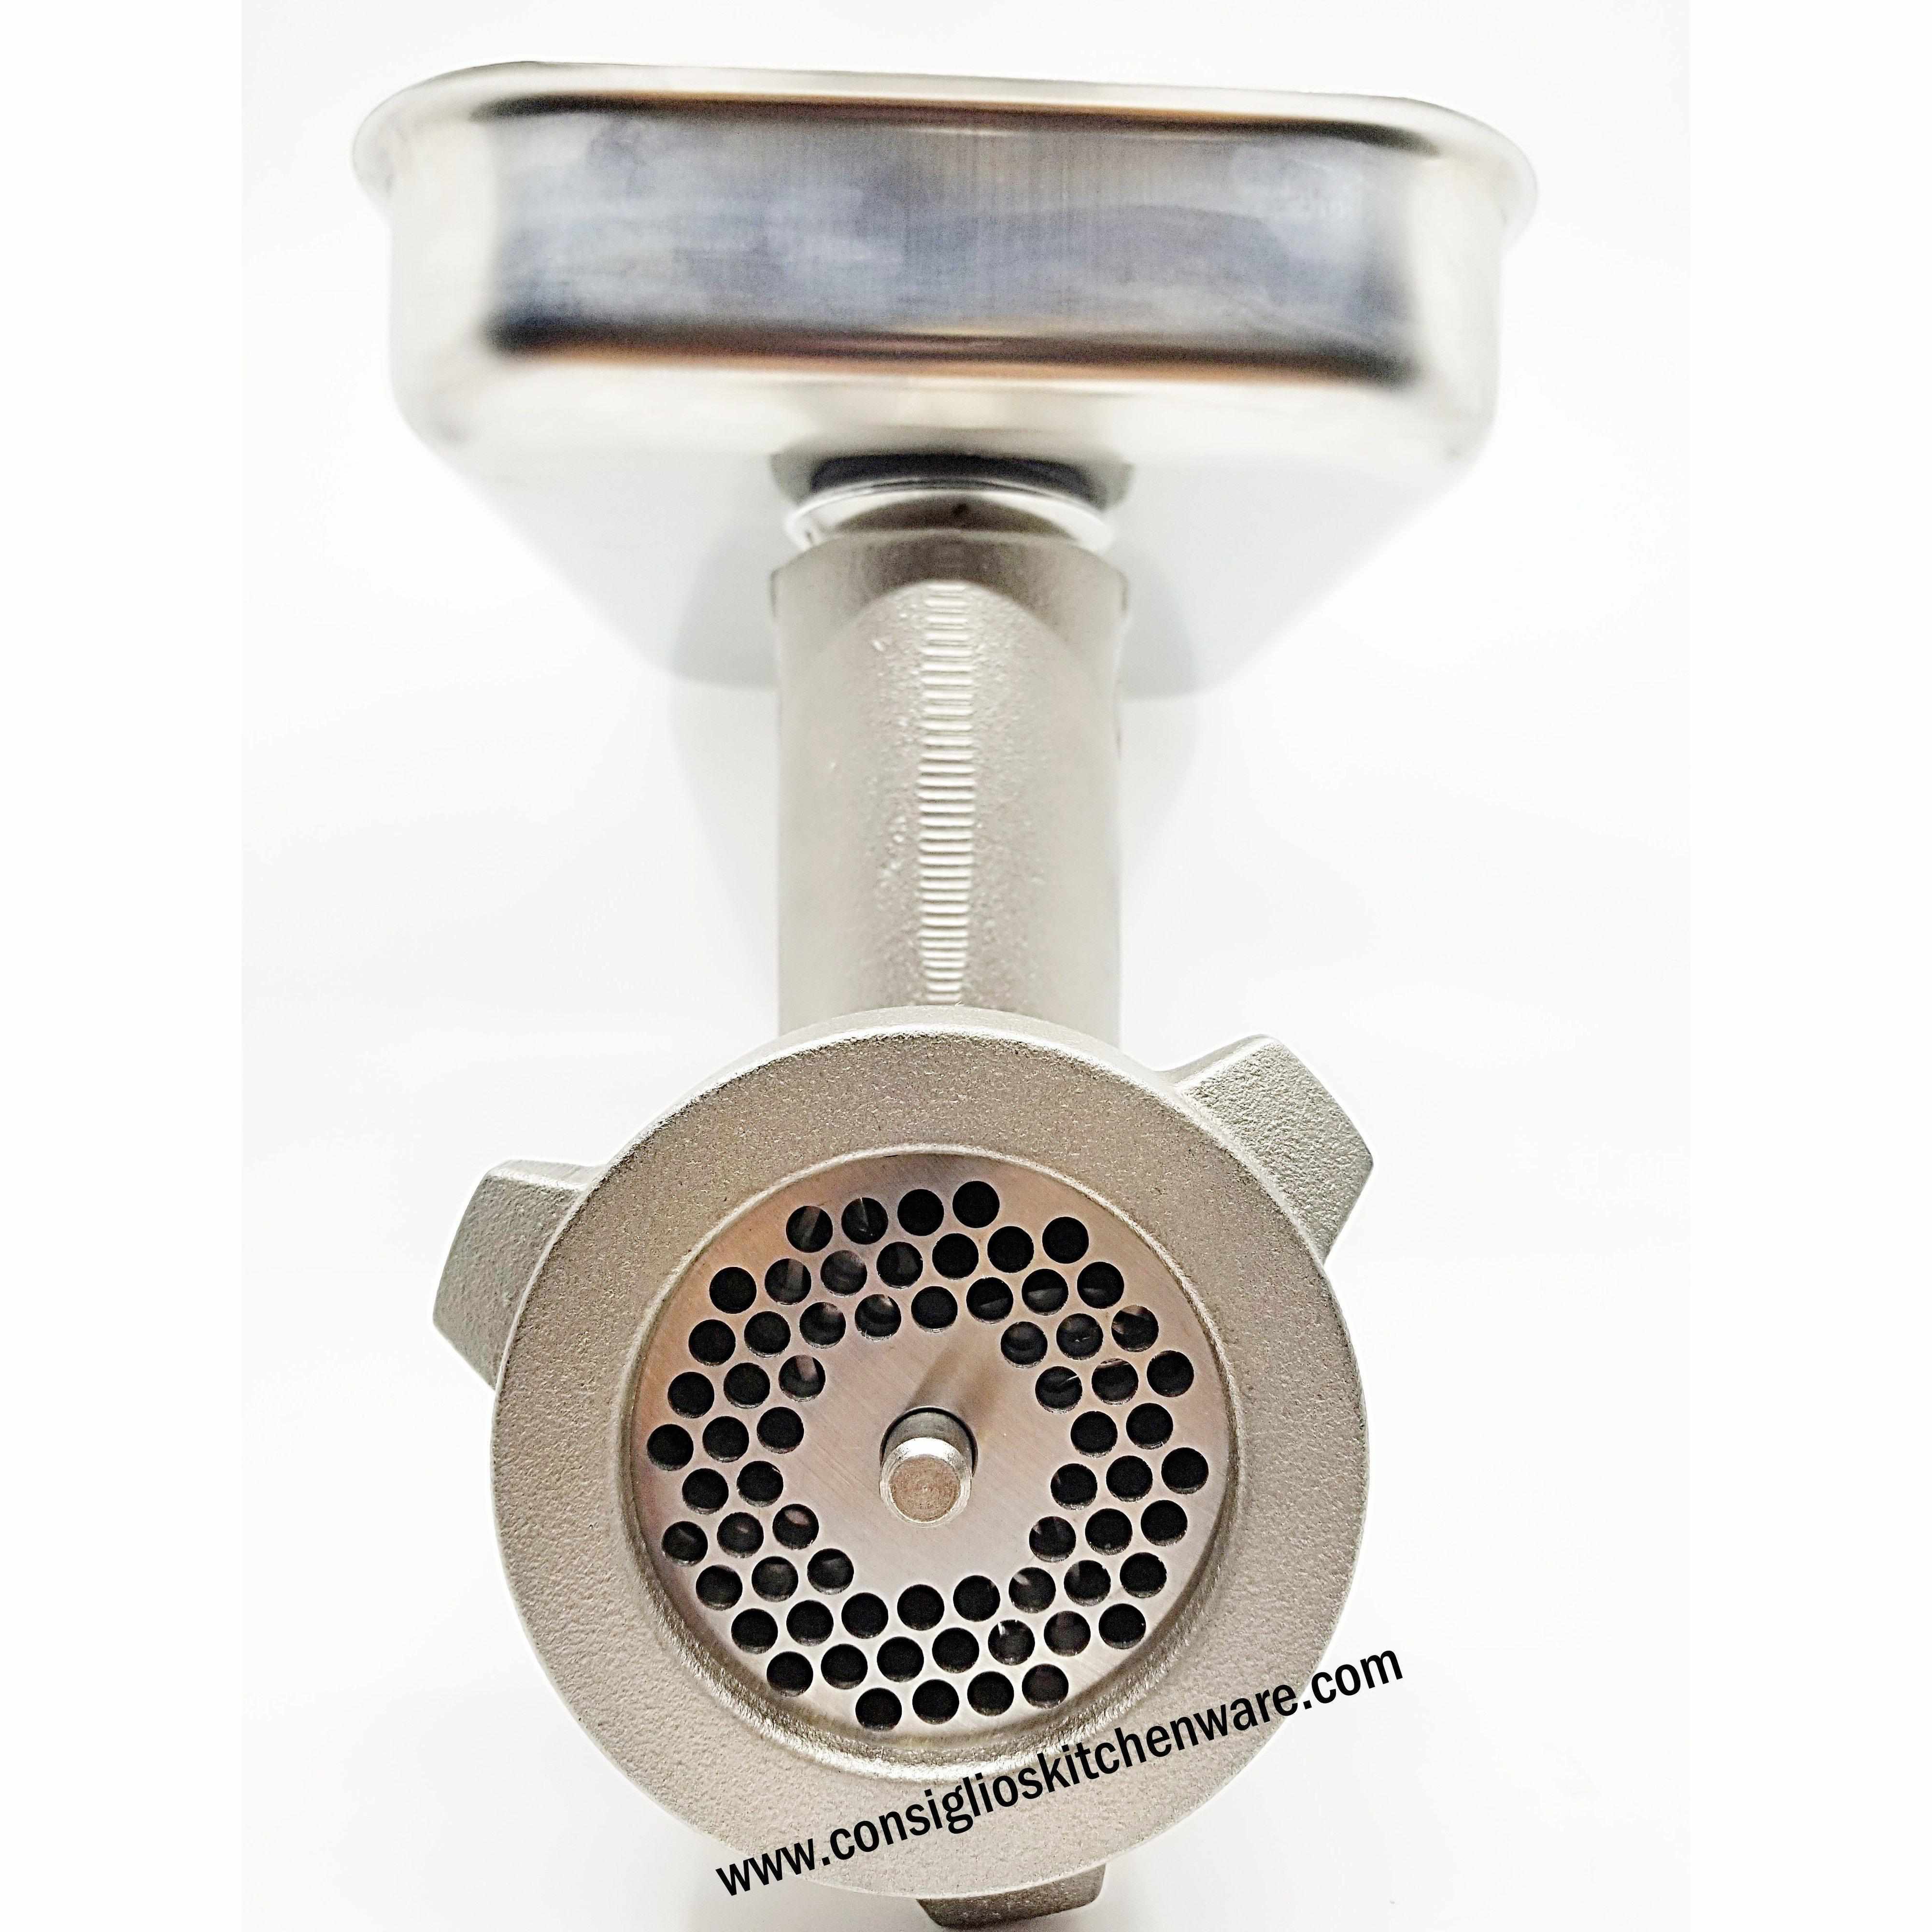 Fabio Leonardi MR0 .5HP TC12 Meat Grinder & Sausage Stuffer - Made in Italy with knives, Discs and Tubes